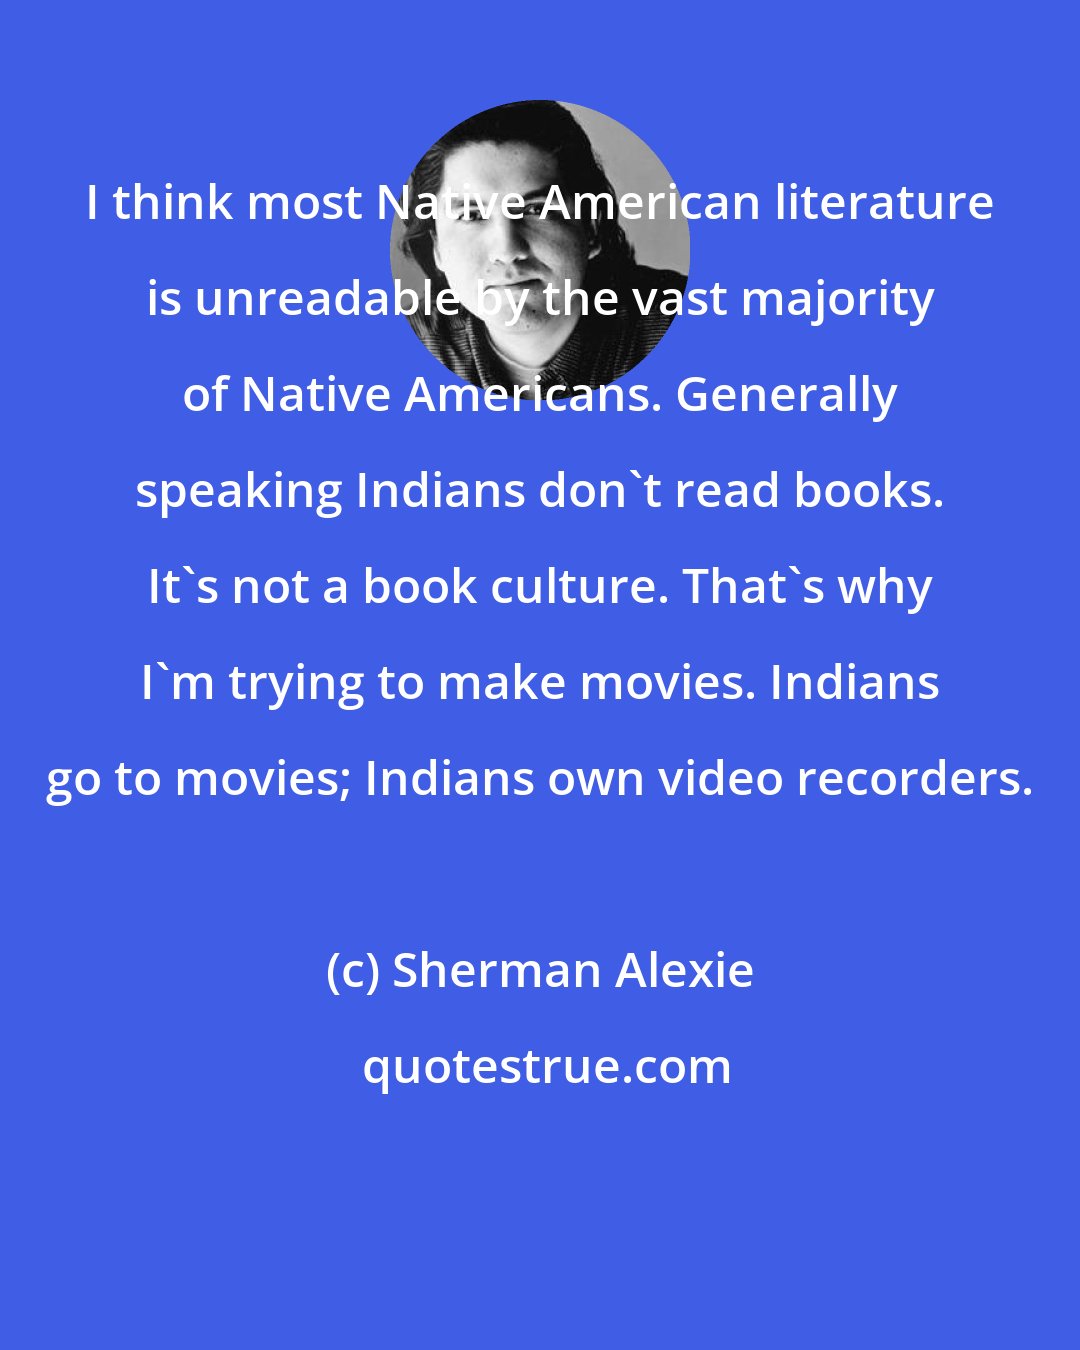 Sherman Alexie: I think most Native American literature is unreadable by the vast majority of Native Americans. Generally speaking Indians don't read books. It's not a book culture. That's why I'm trying to make movies. Indians go to movies; Indians own video recorders.